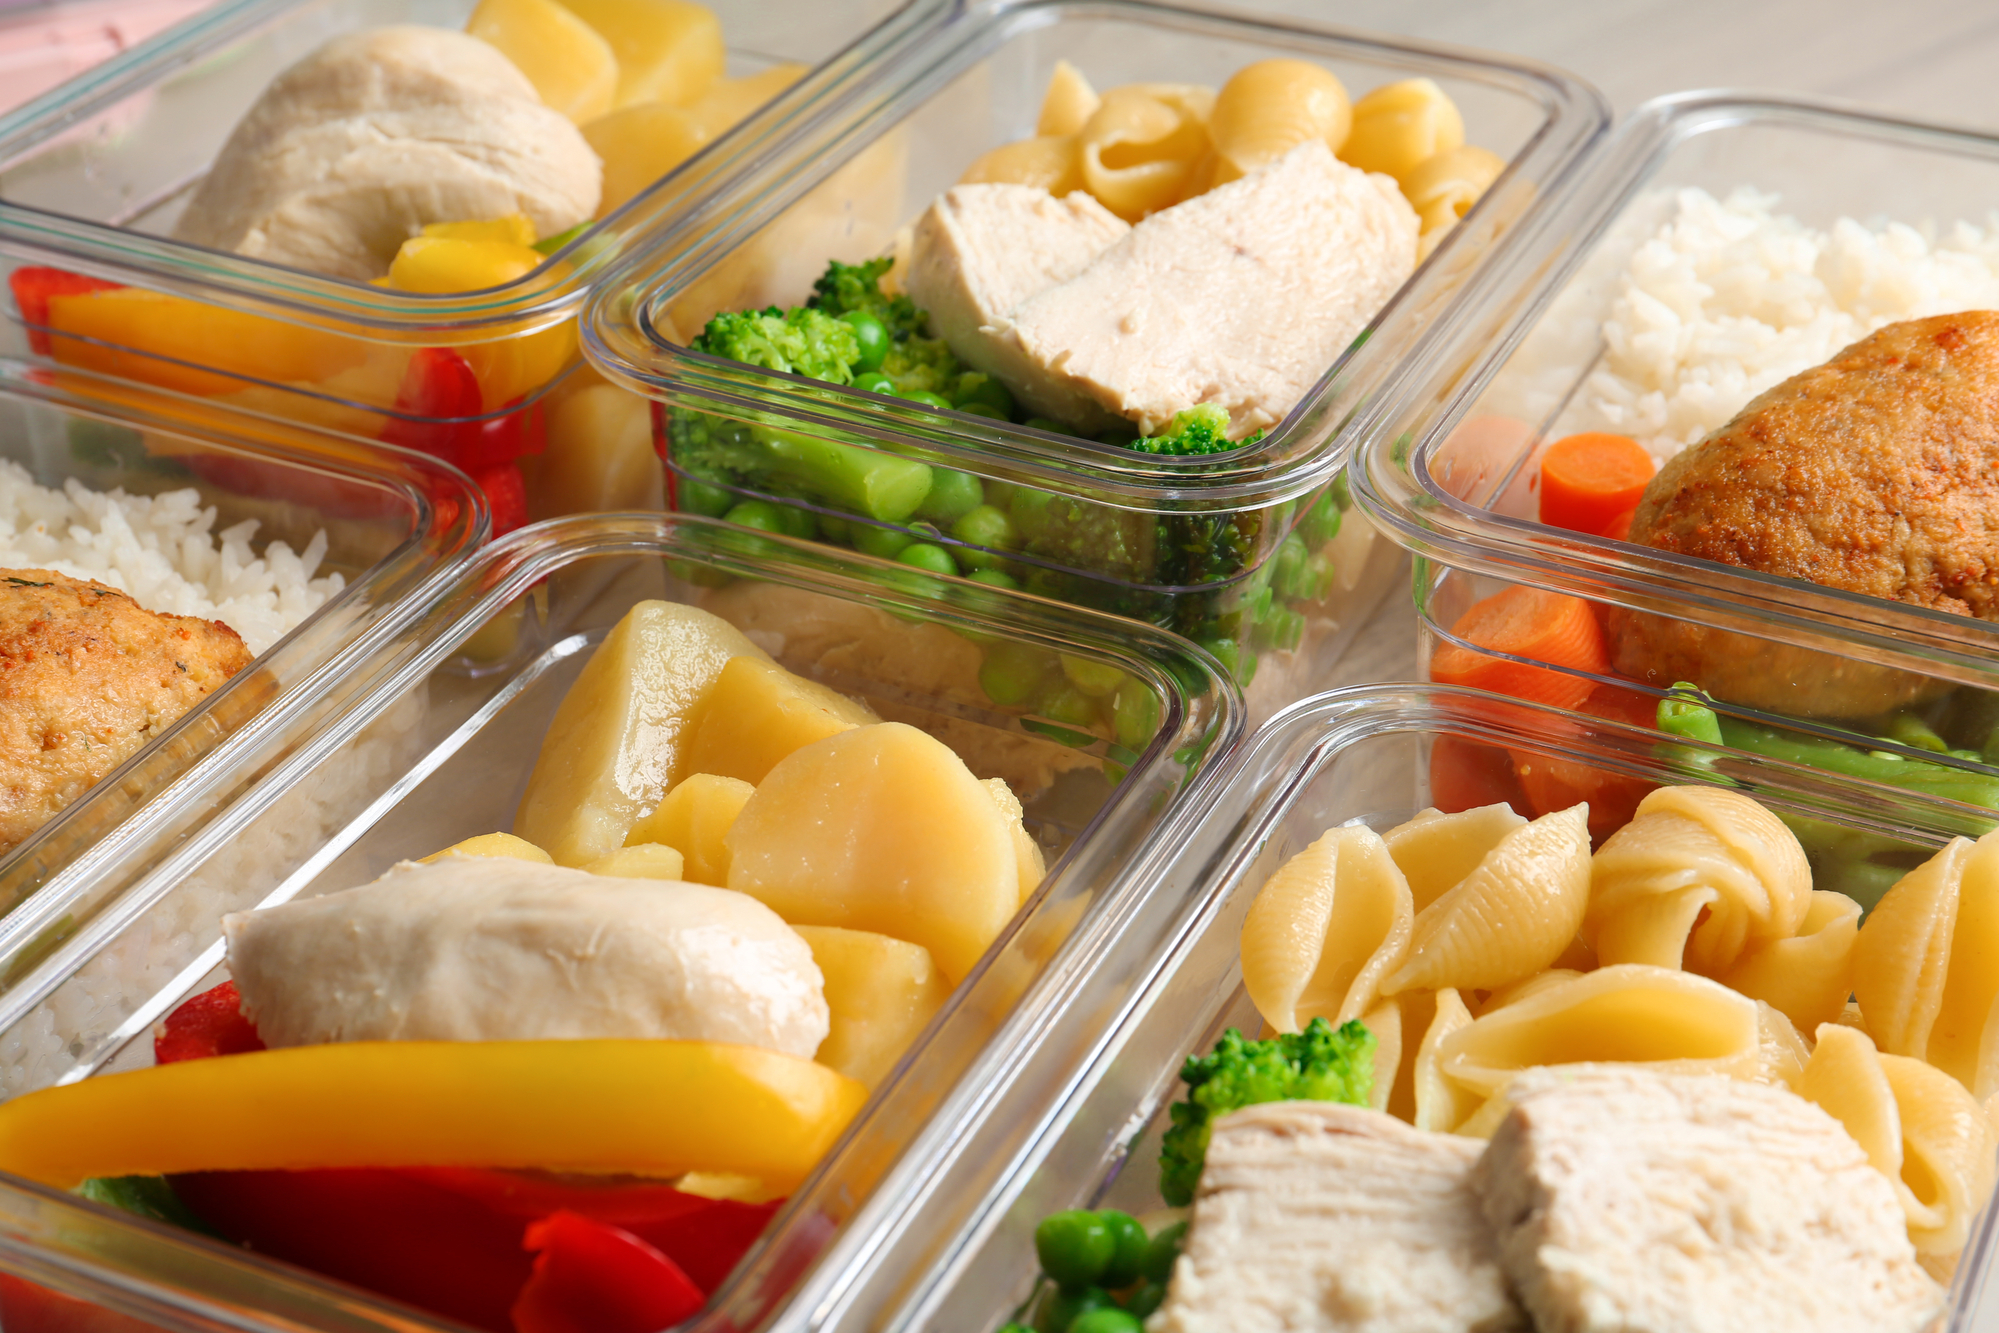 How to store and reheat prepped meals for optimal taste and nutrition